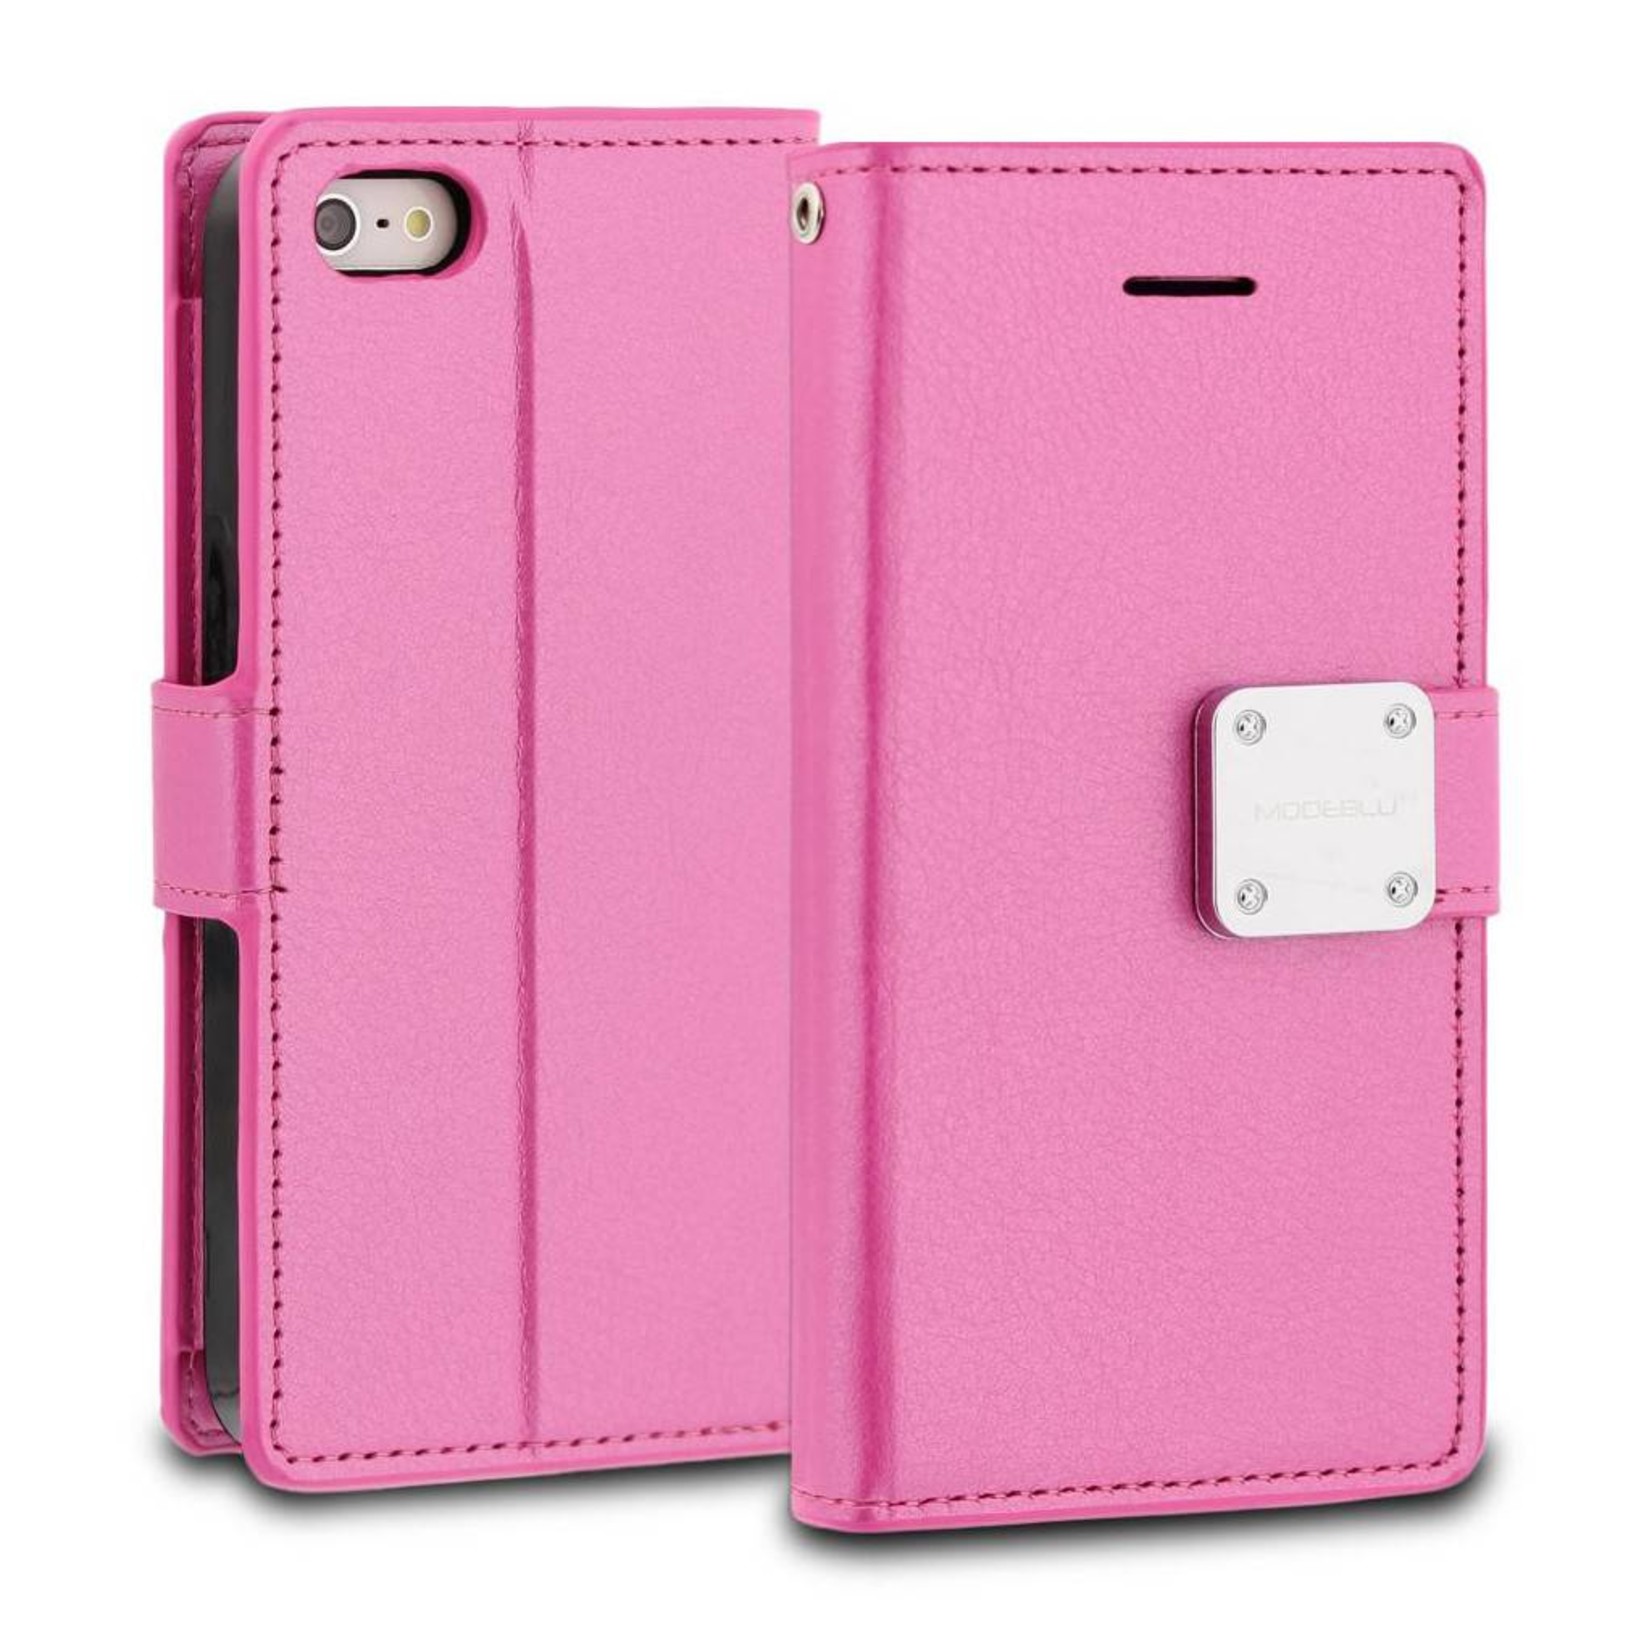 ModeBlu PU Leather Wallet MB Mode Diary Case for iPhone 5/5S/SE